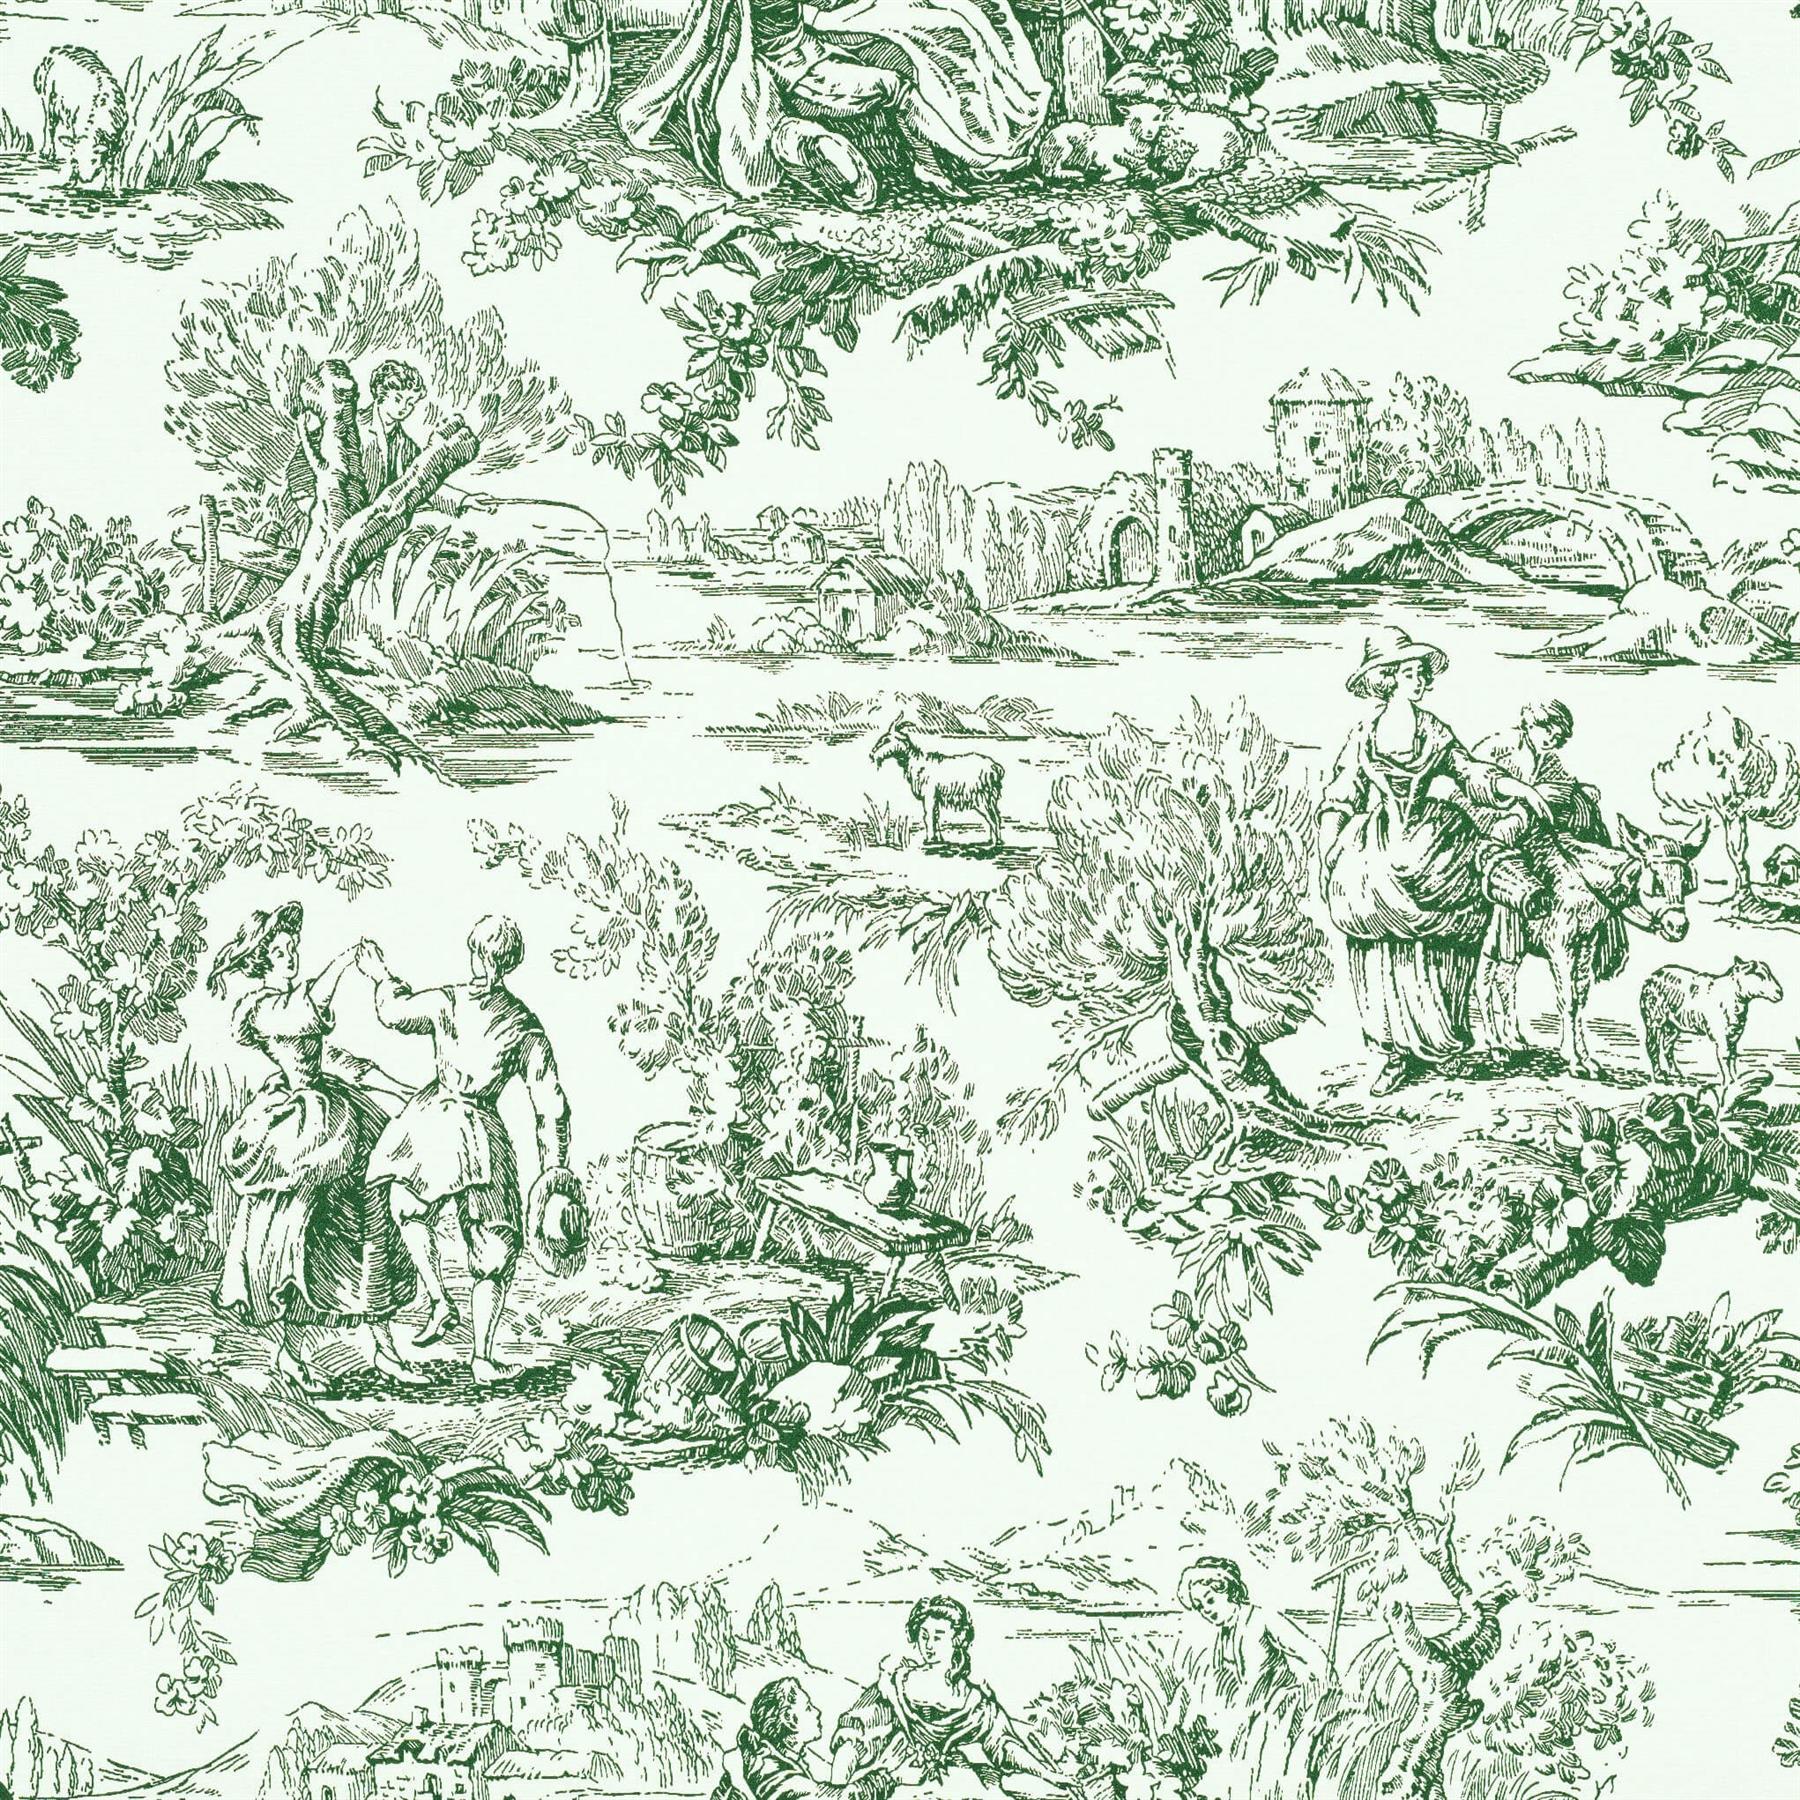 Toile De Jouy Stile Peel and Stick Wallpaper  24undefinedundefined W x  10undefined L  On Sale  Bed Bath  Beyond  35173164